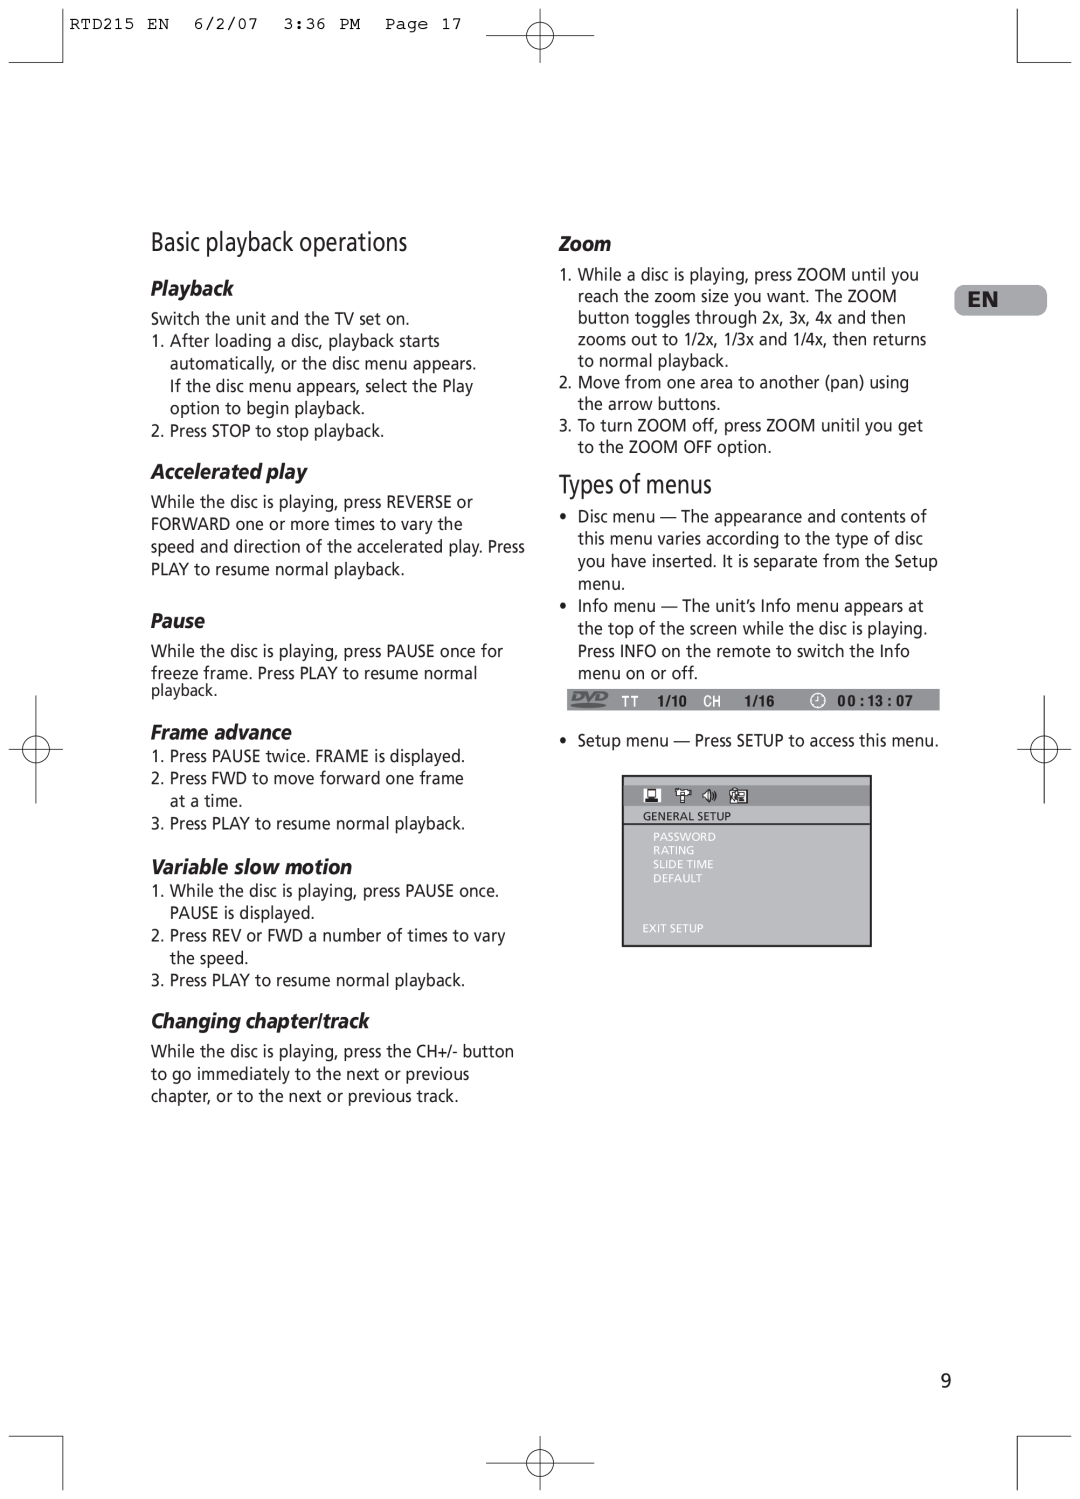 RCA RTD215 user manual Basic playback operations, Types of menus, Playback, Accelerated play, Pause, Frame advance, Zoom 